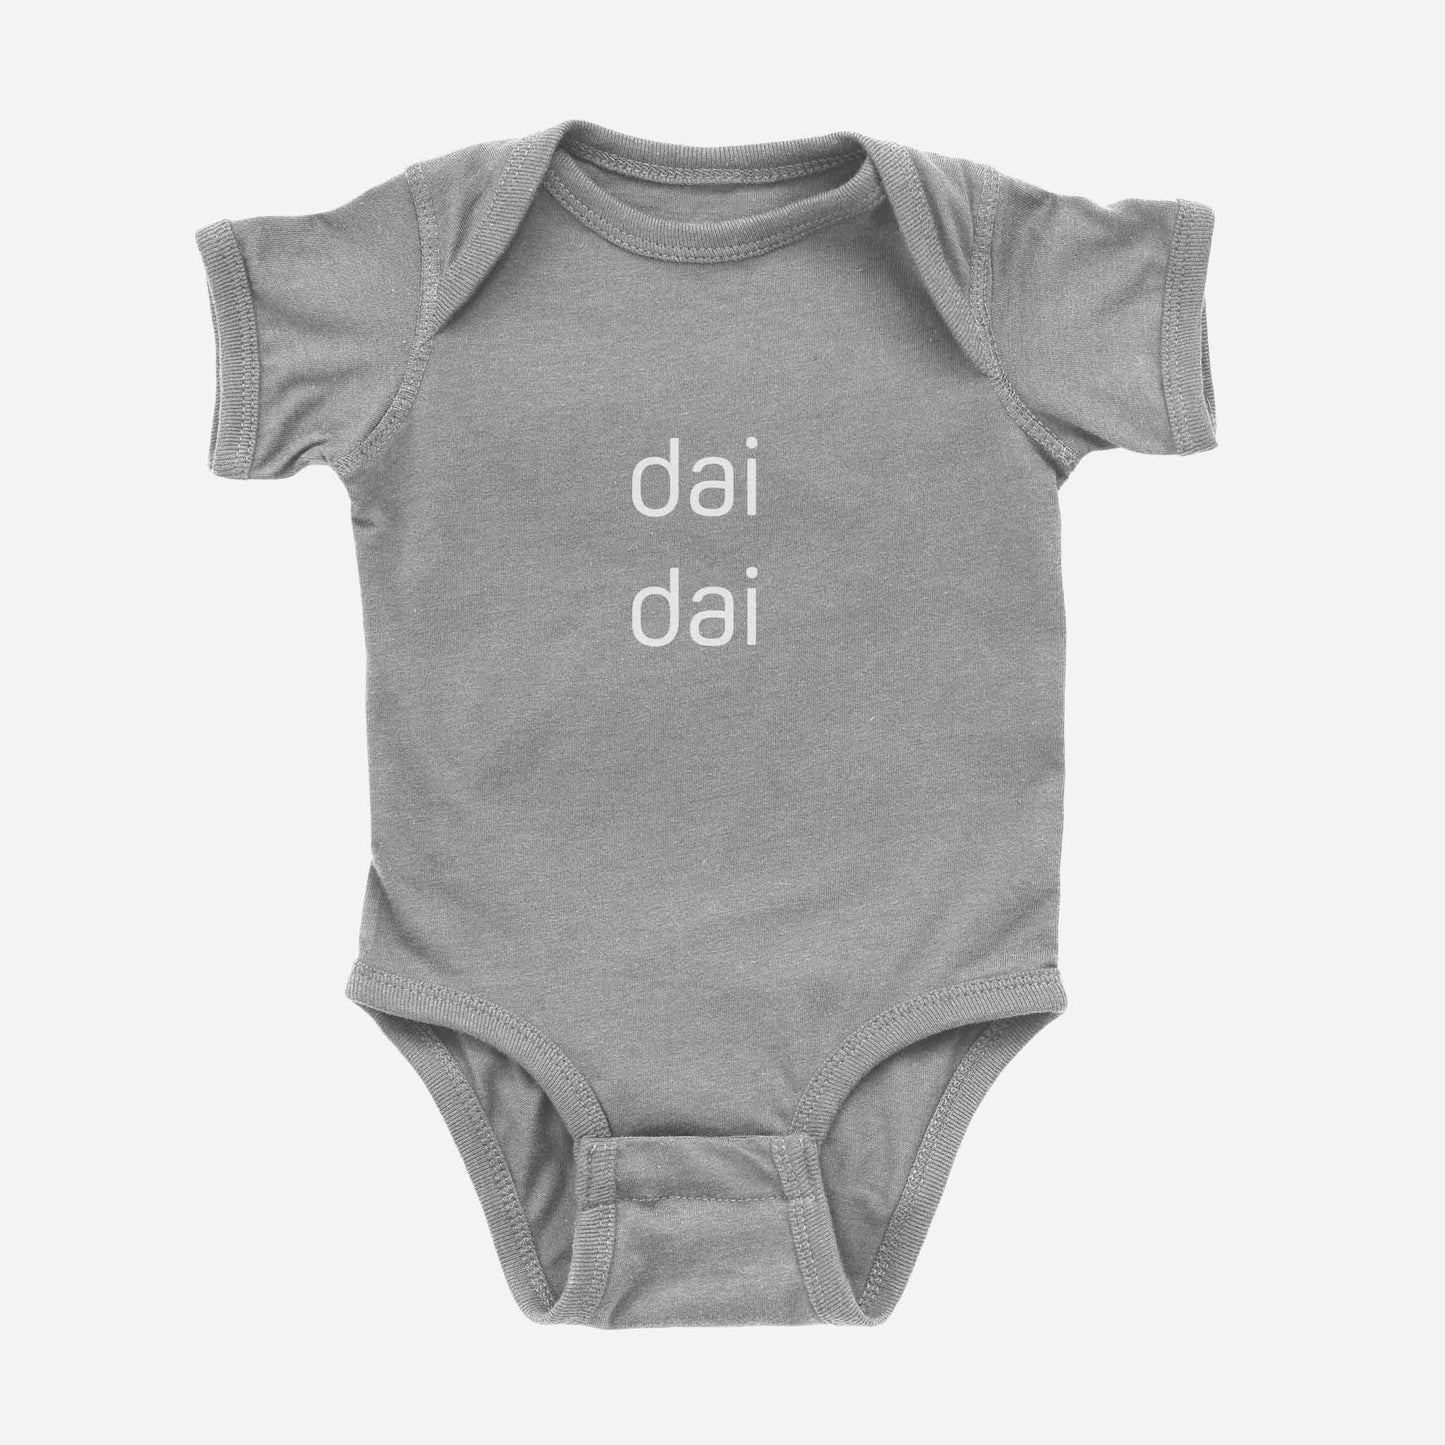 dai dai little brother chinese cantonese Onesie titanium front - Asian Baby Clothing